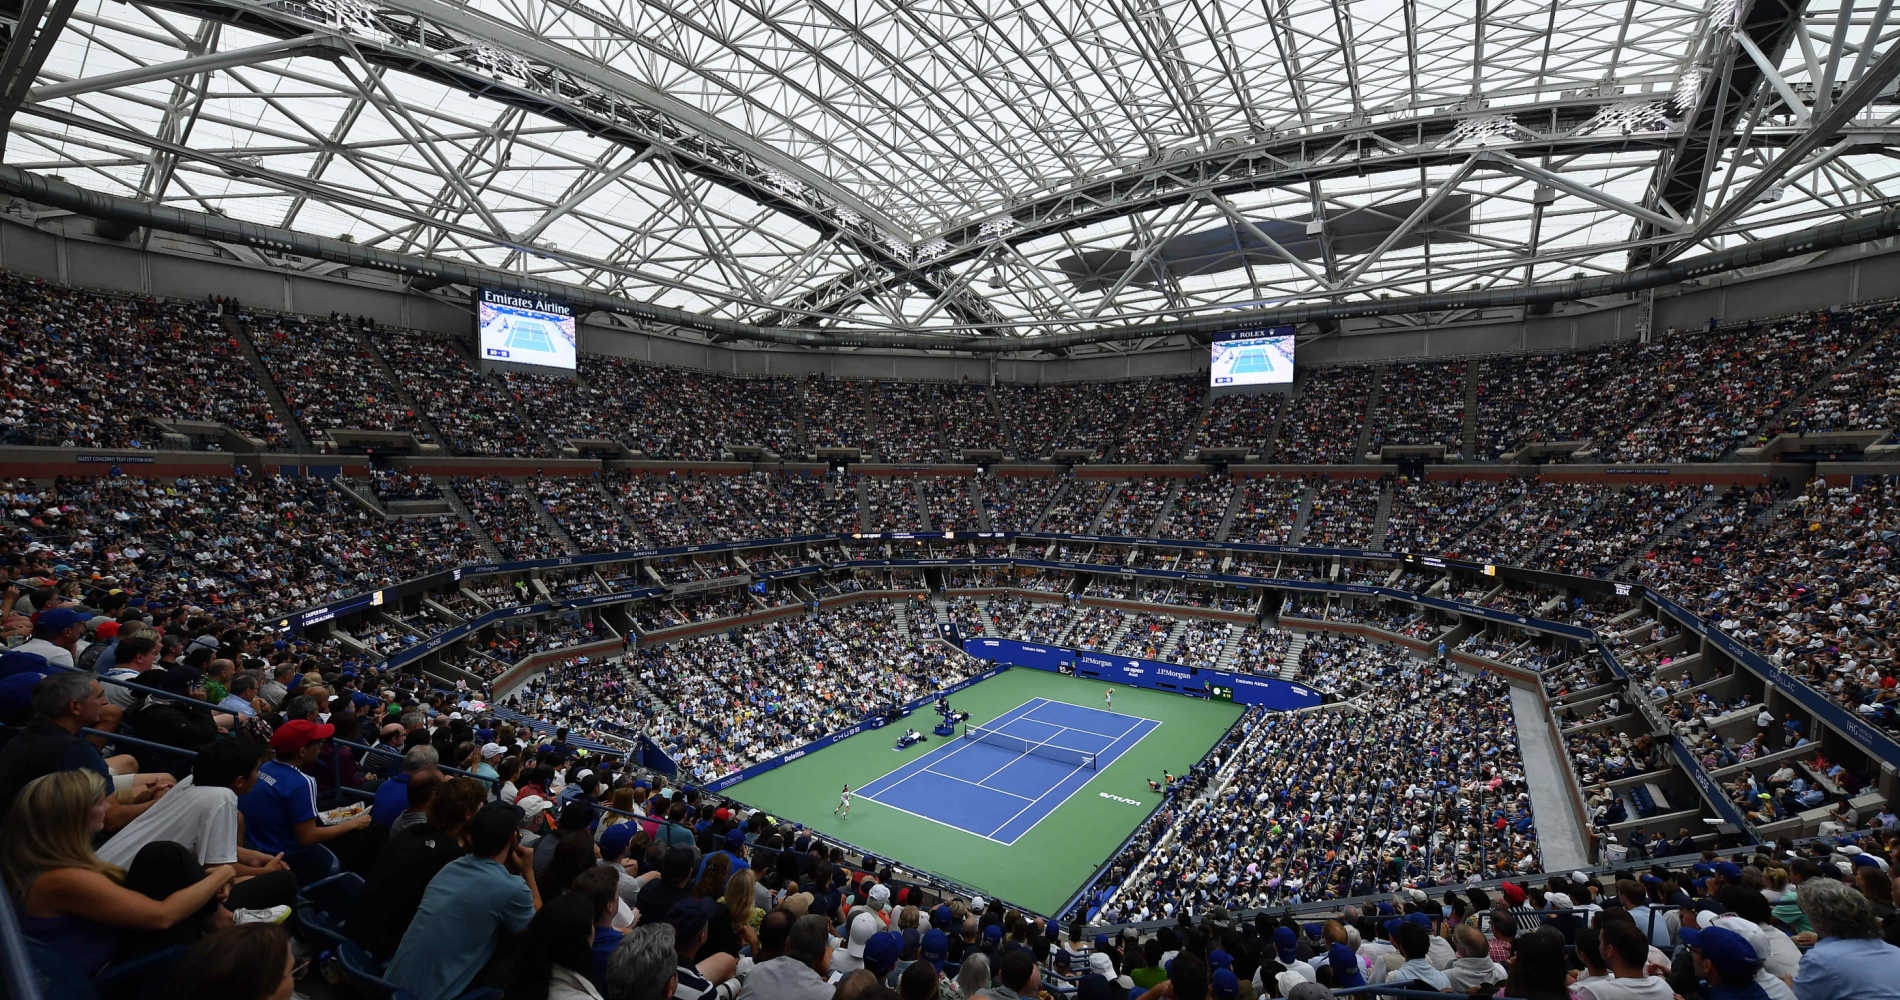 Tennis Everything you wanted to know about the 2023 US Open